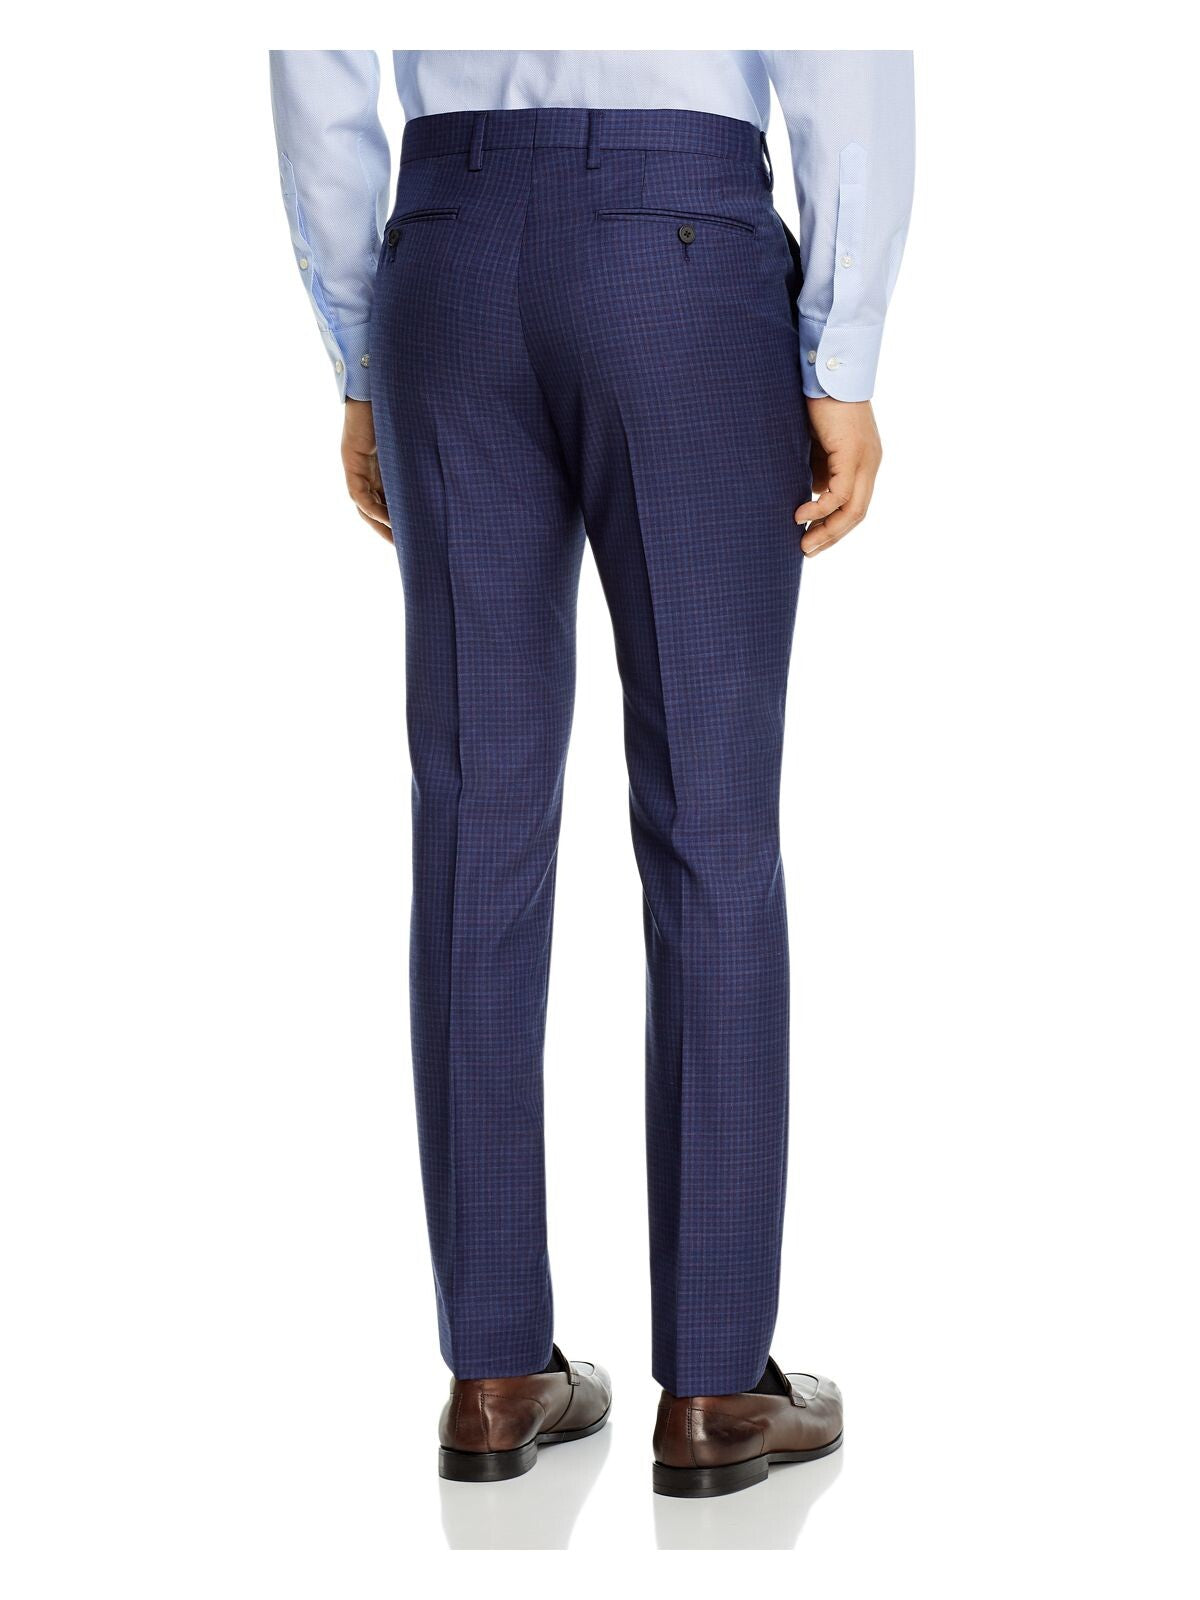 THEORY Mens Blue Flat Front, Check Slim Fit Pants 38